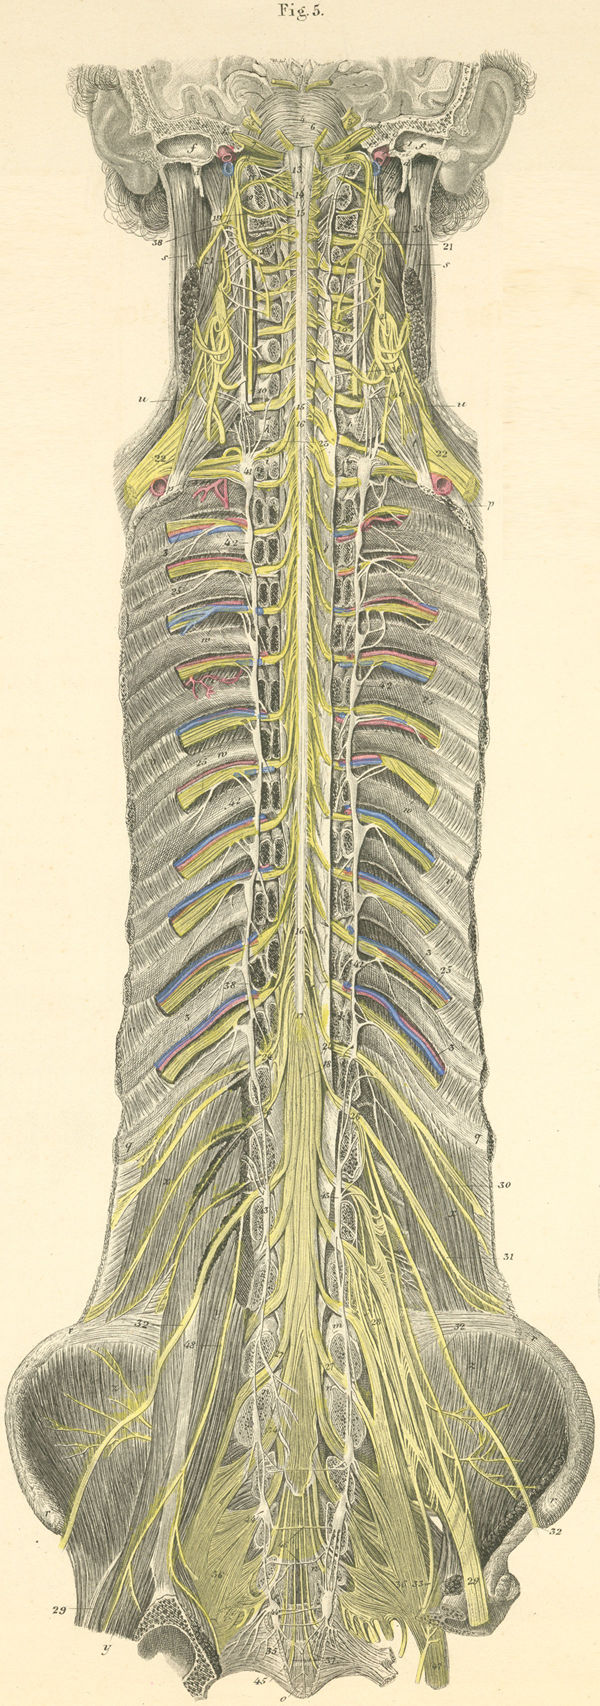 The anterior surface of the spinal cord